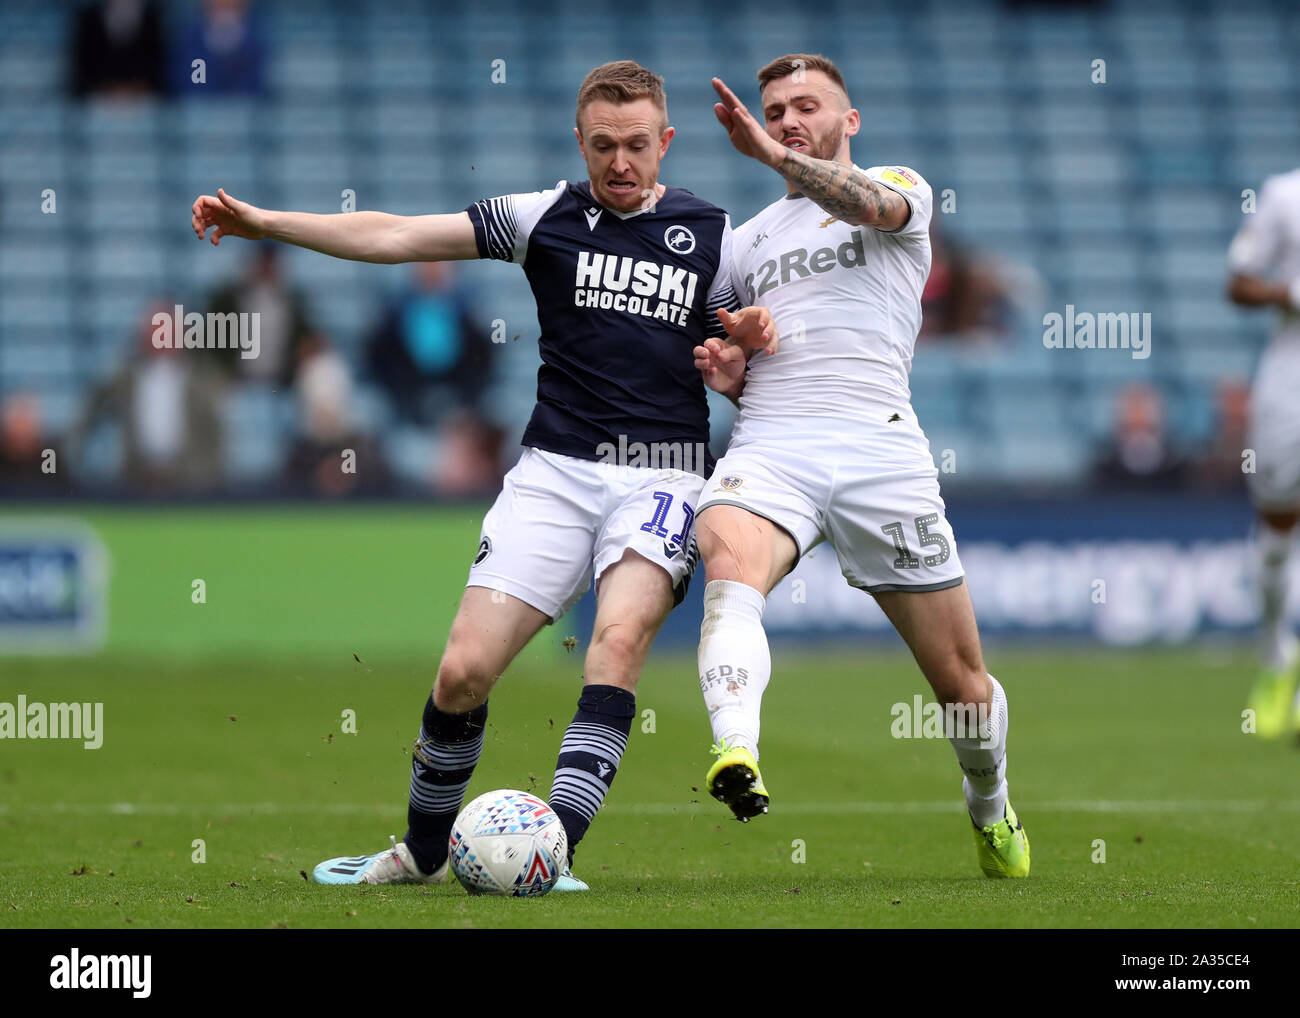 Millwall FC - Our gallery from Millwall's trip to Leeds United